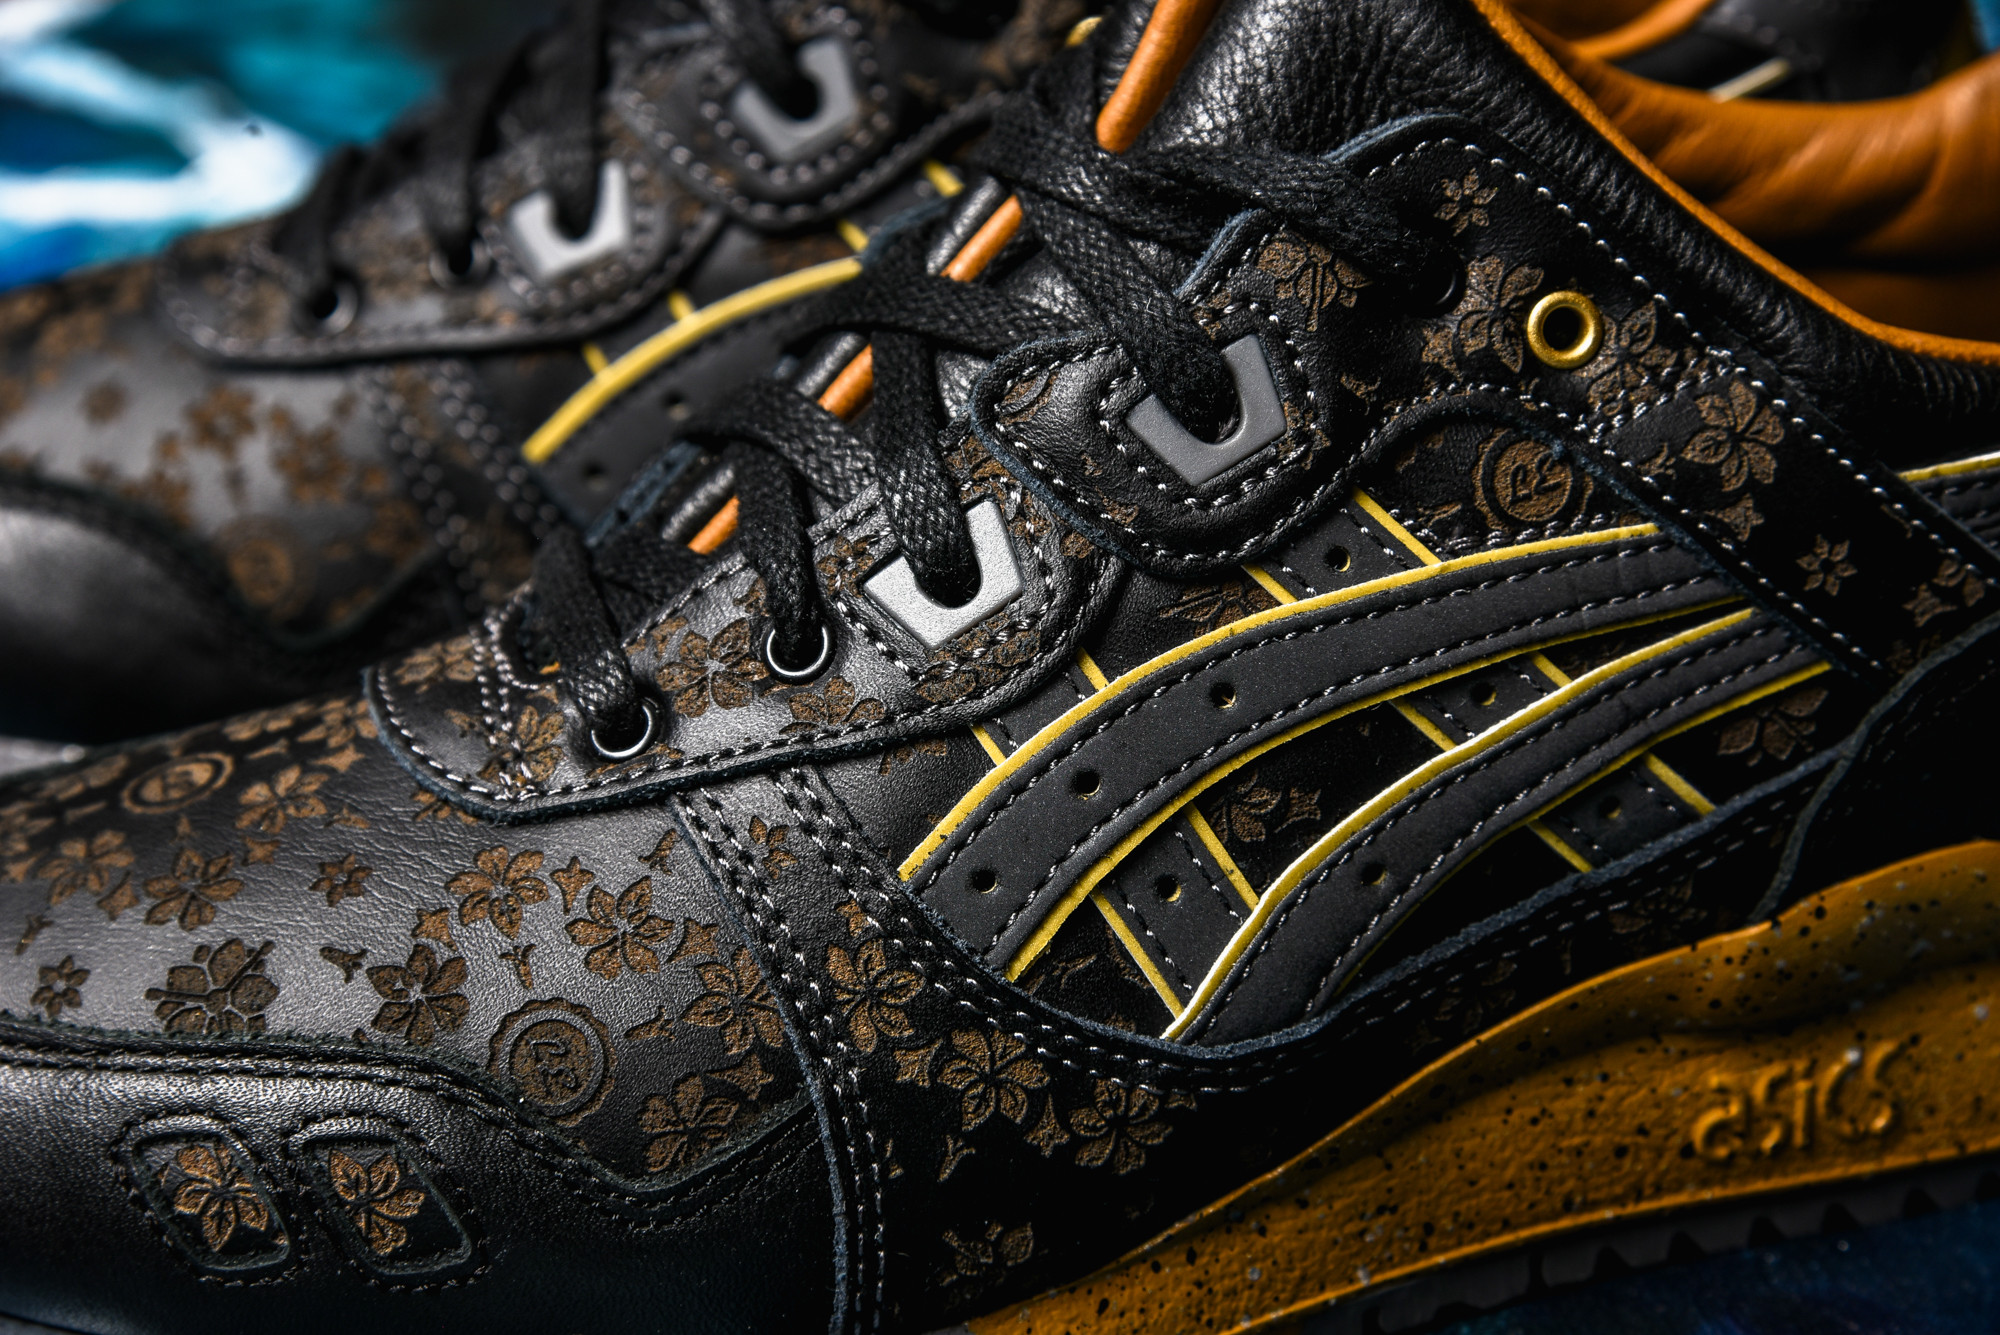 Limited EDT Releases Two Asics Inspired 